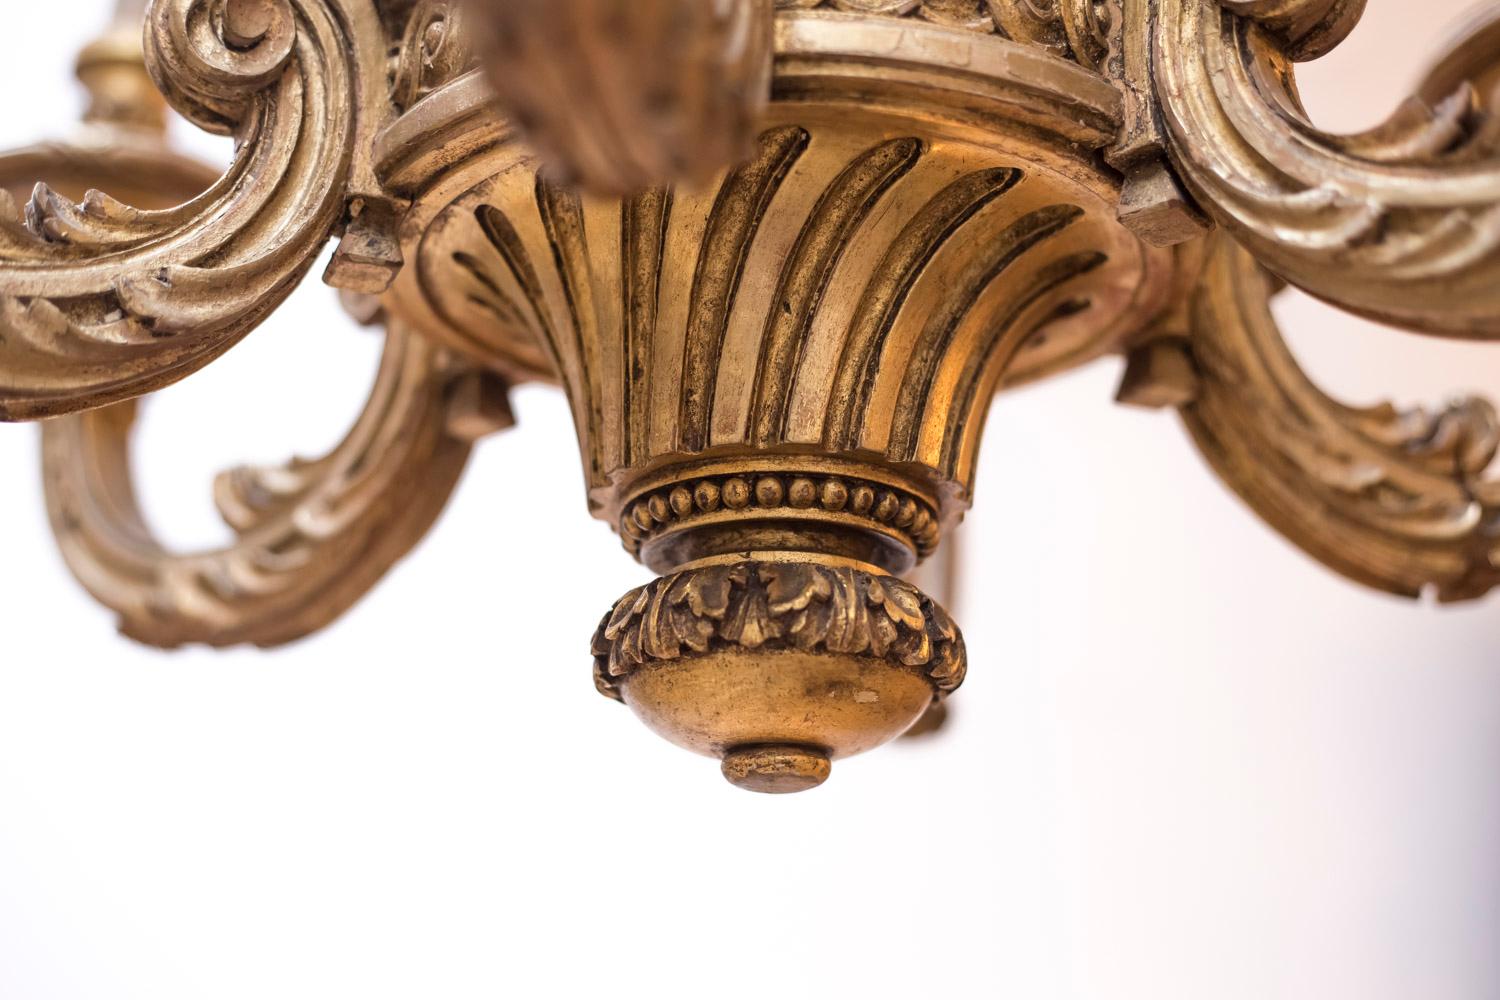 Regence style giltwood chandelier with six arm lights.
Central structure decorated with a frieze of grooves, acanthus leaves, water leaves, tracery, beads, and laurel wreaths. The upper part is adorned with swirls.
The six arm lights are acanthus